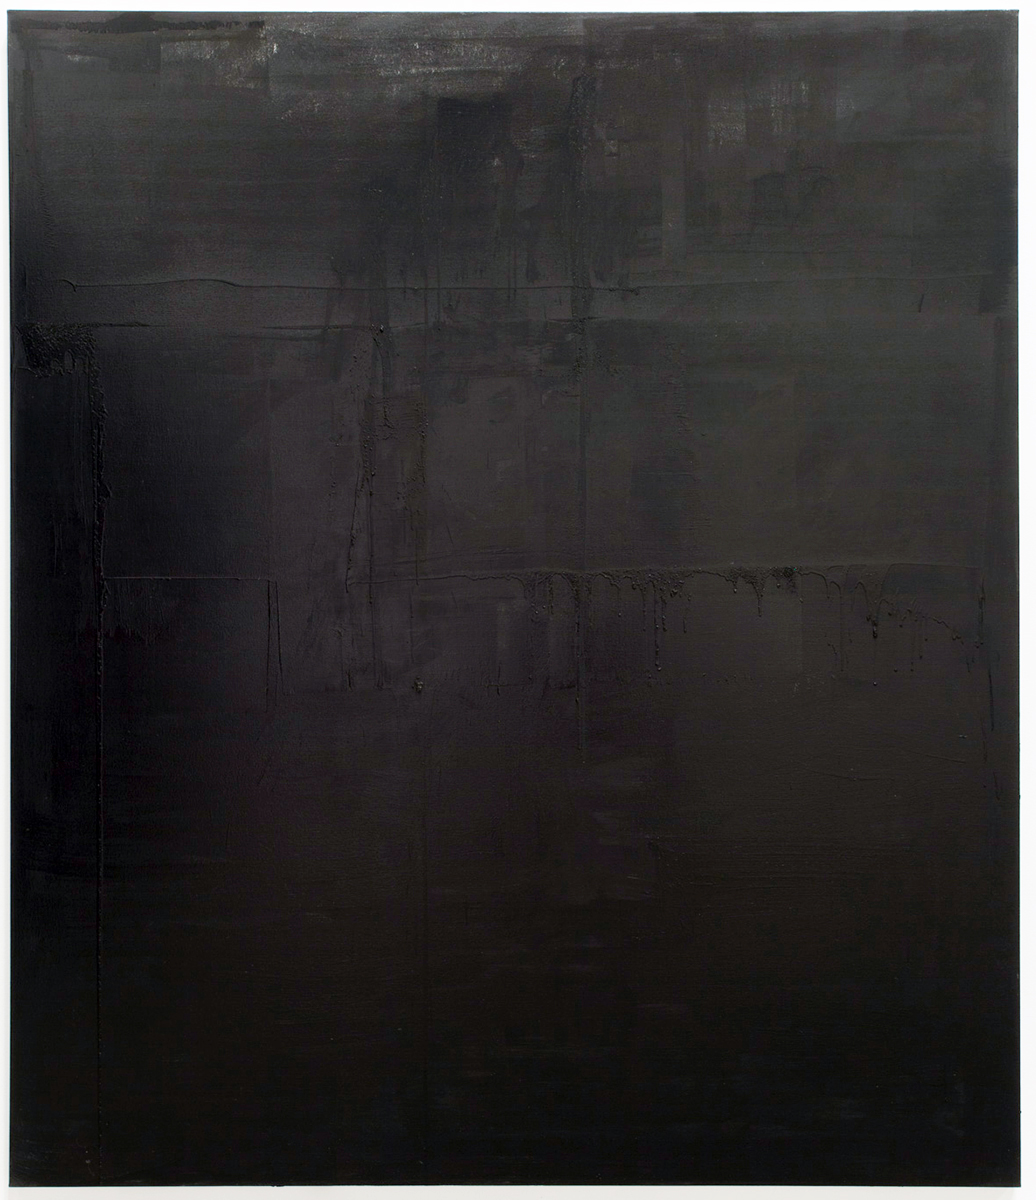  Untitled black monochrome painting (2.10.PBk9.CI77267/PBk11.Fe3O4) from the Frequency10. series. Oil, grit, graphite on canvas, 213.36cm x 182.88cm (84 inches x 72 inches), 2016-2017.    